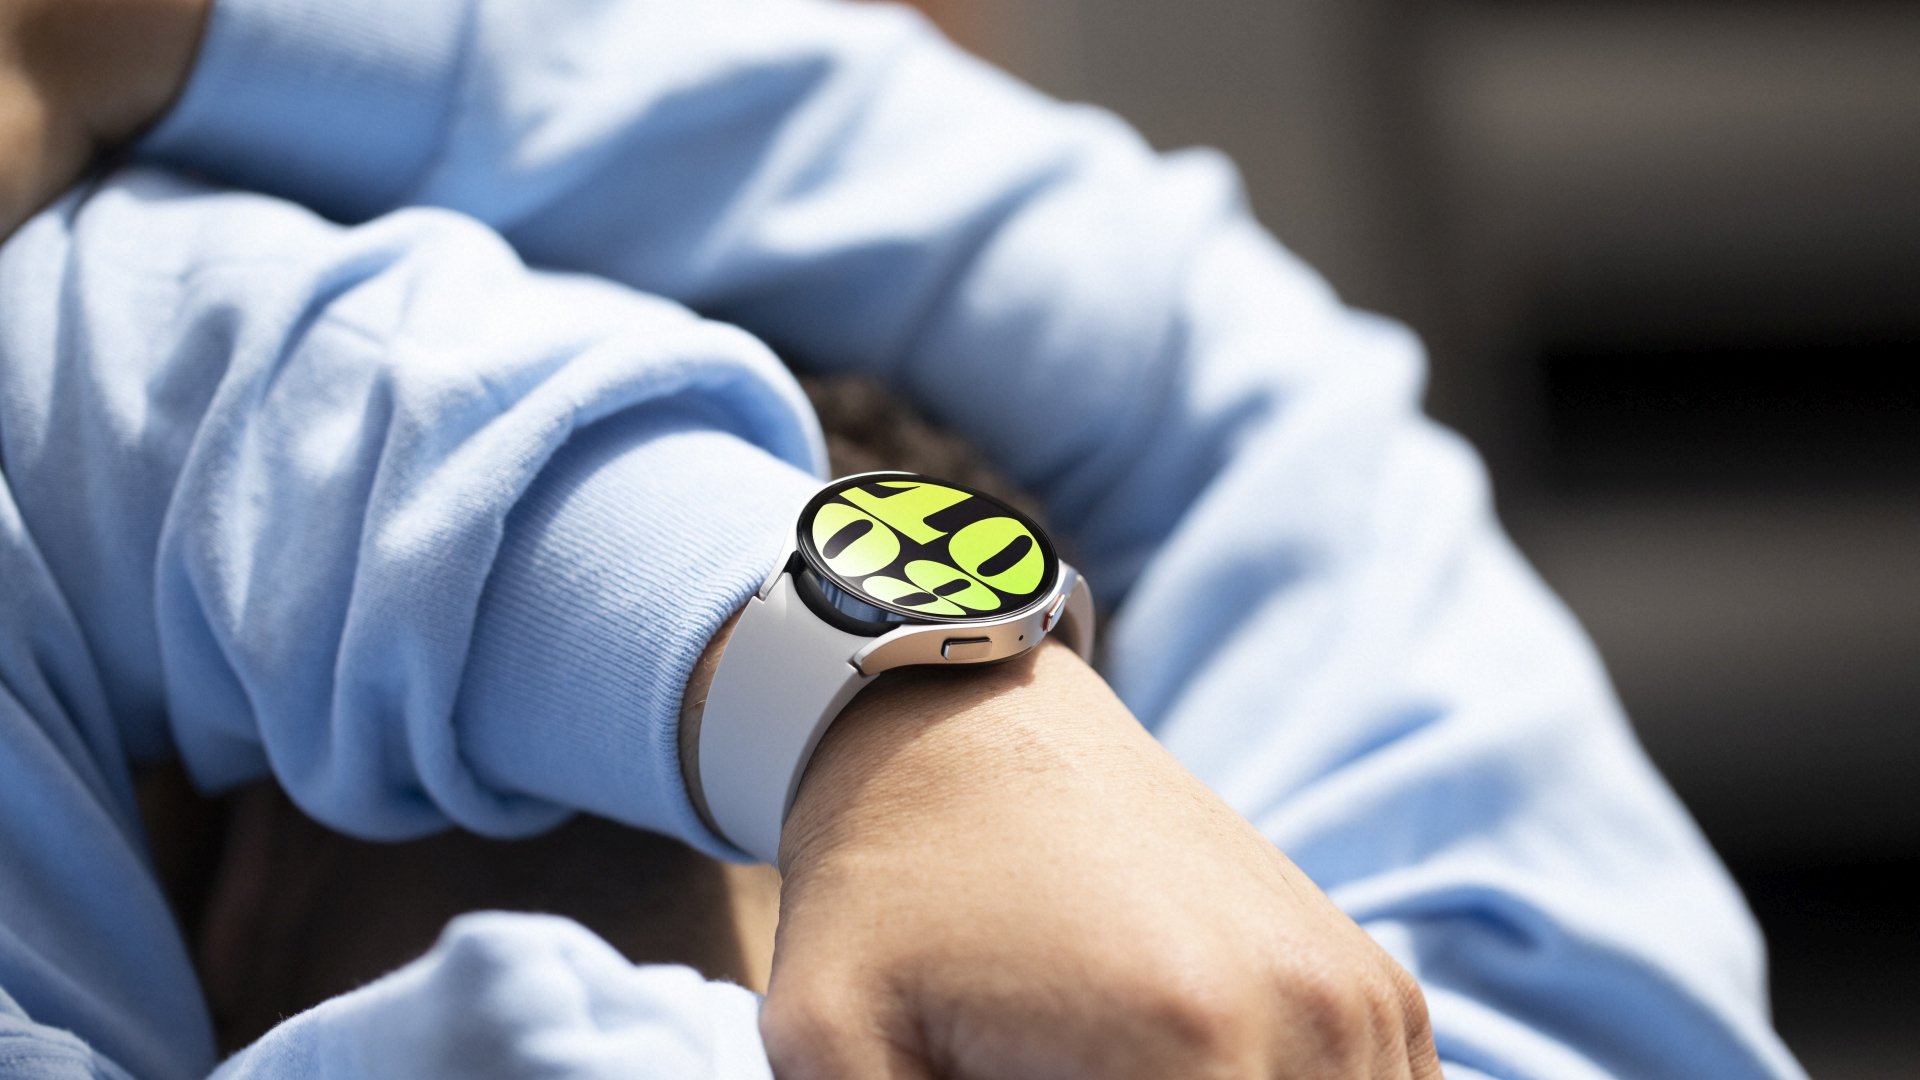 Galaxy Watch 6 brings the debut of new band connector